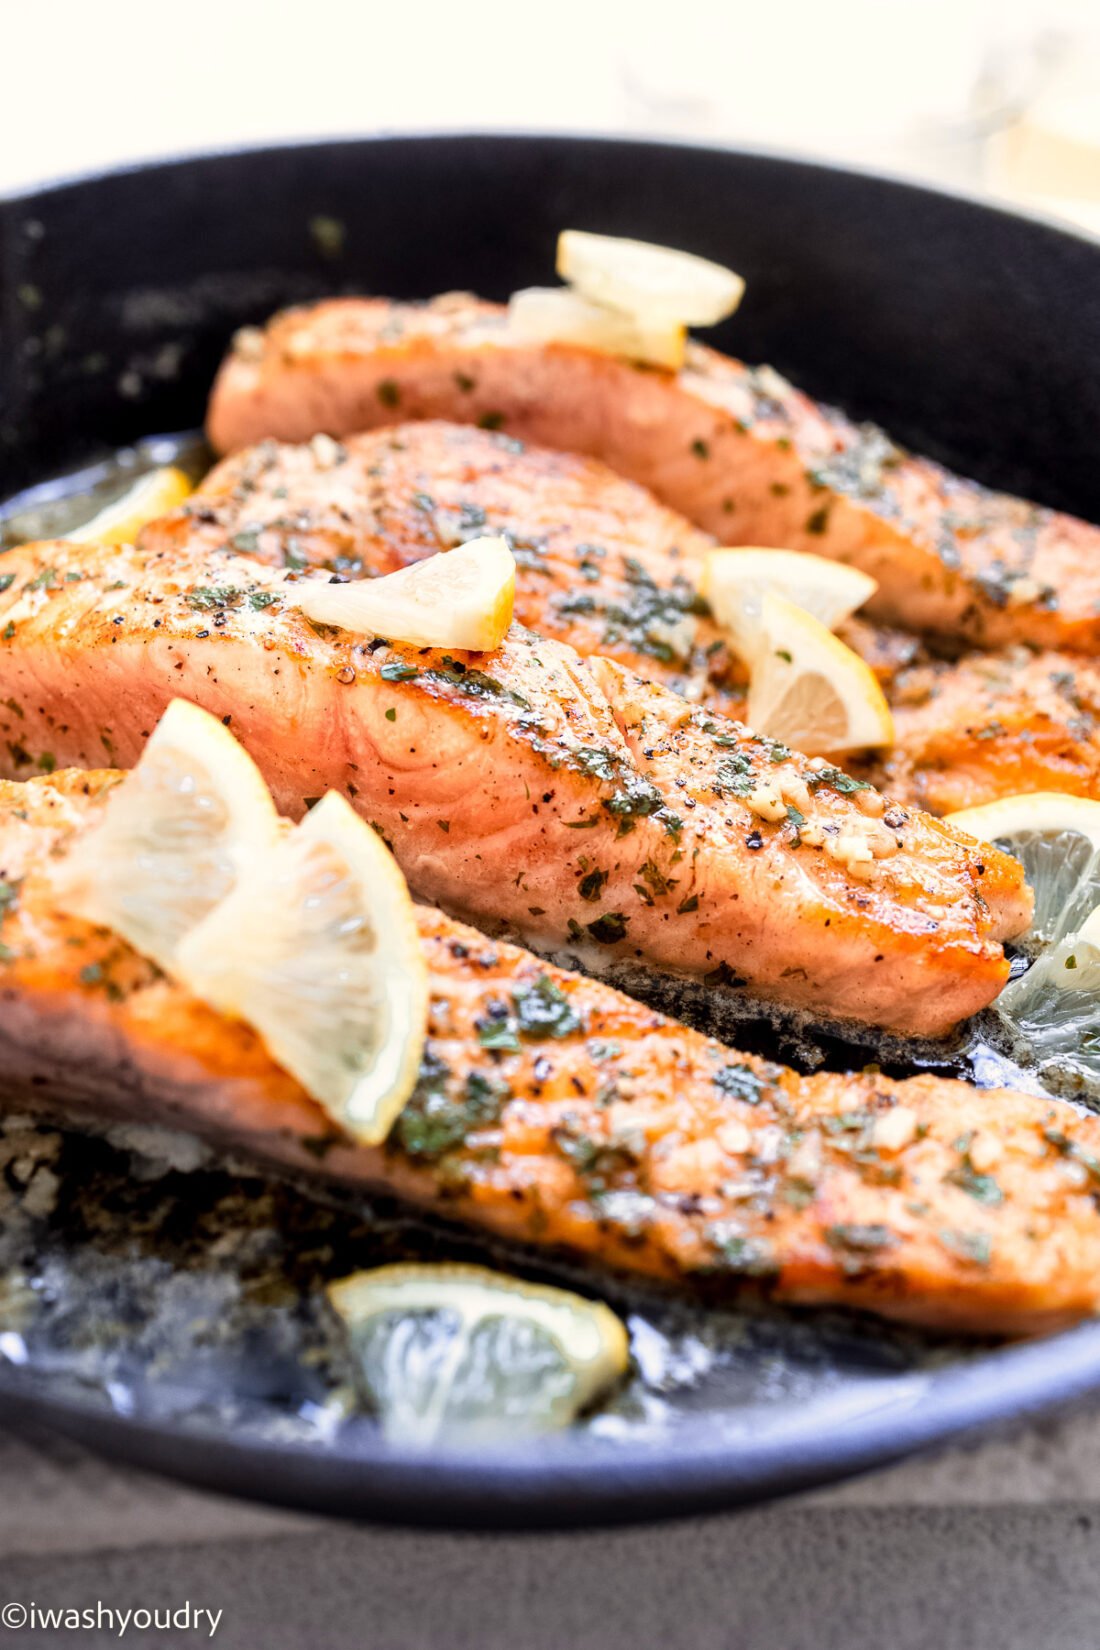 Slices of salmon cooked in a metal pan with lemon slices.